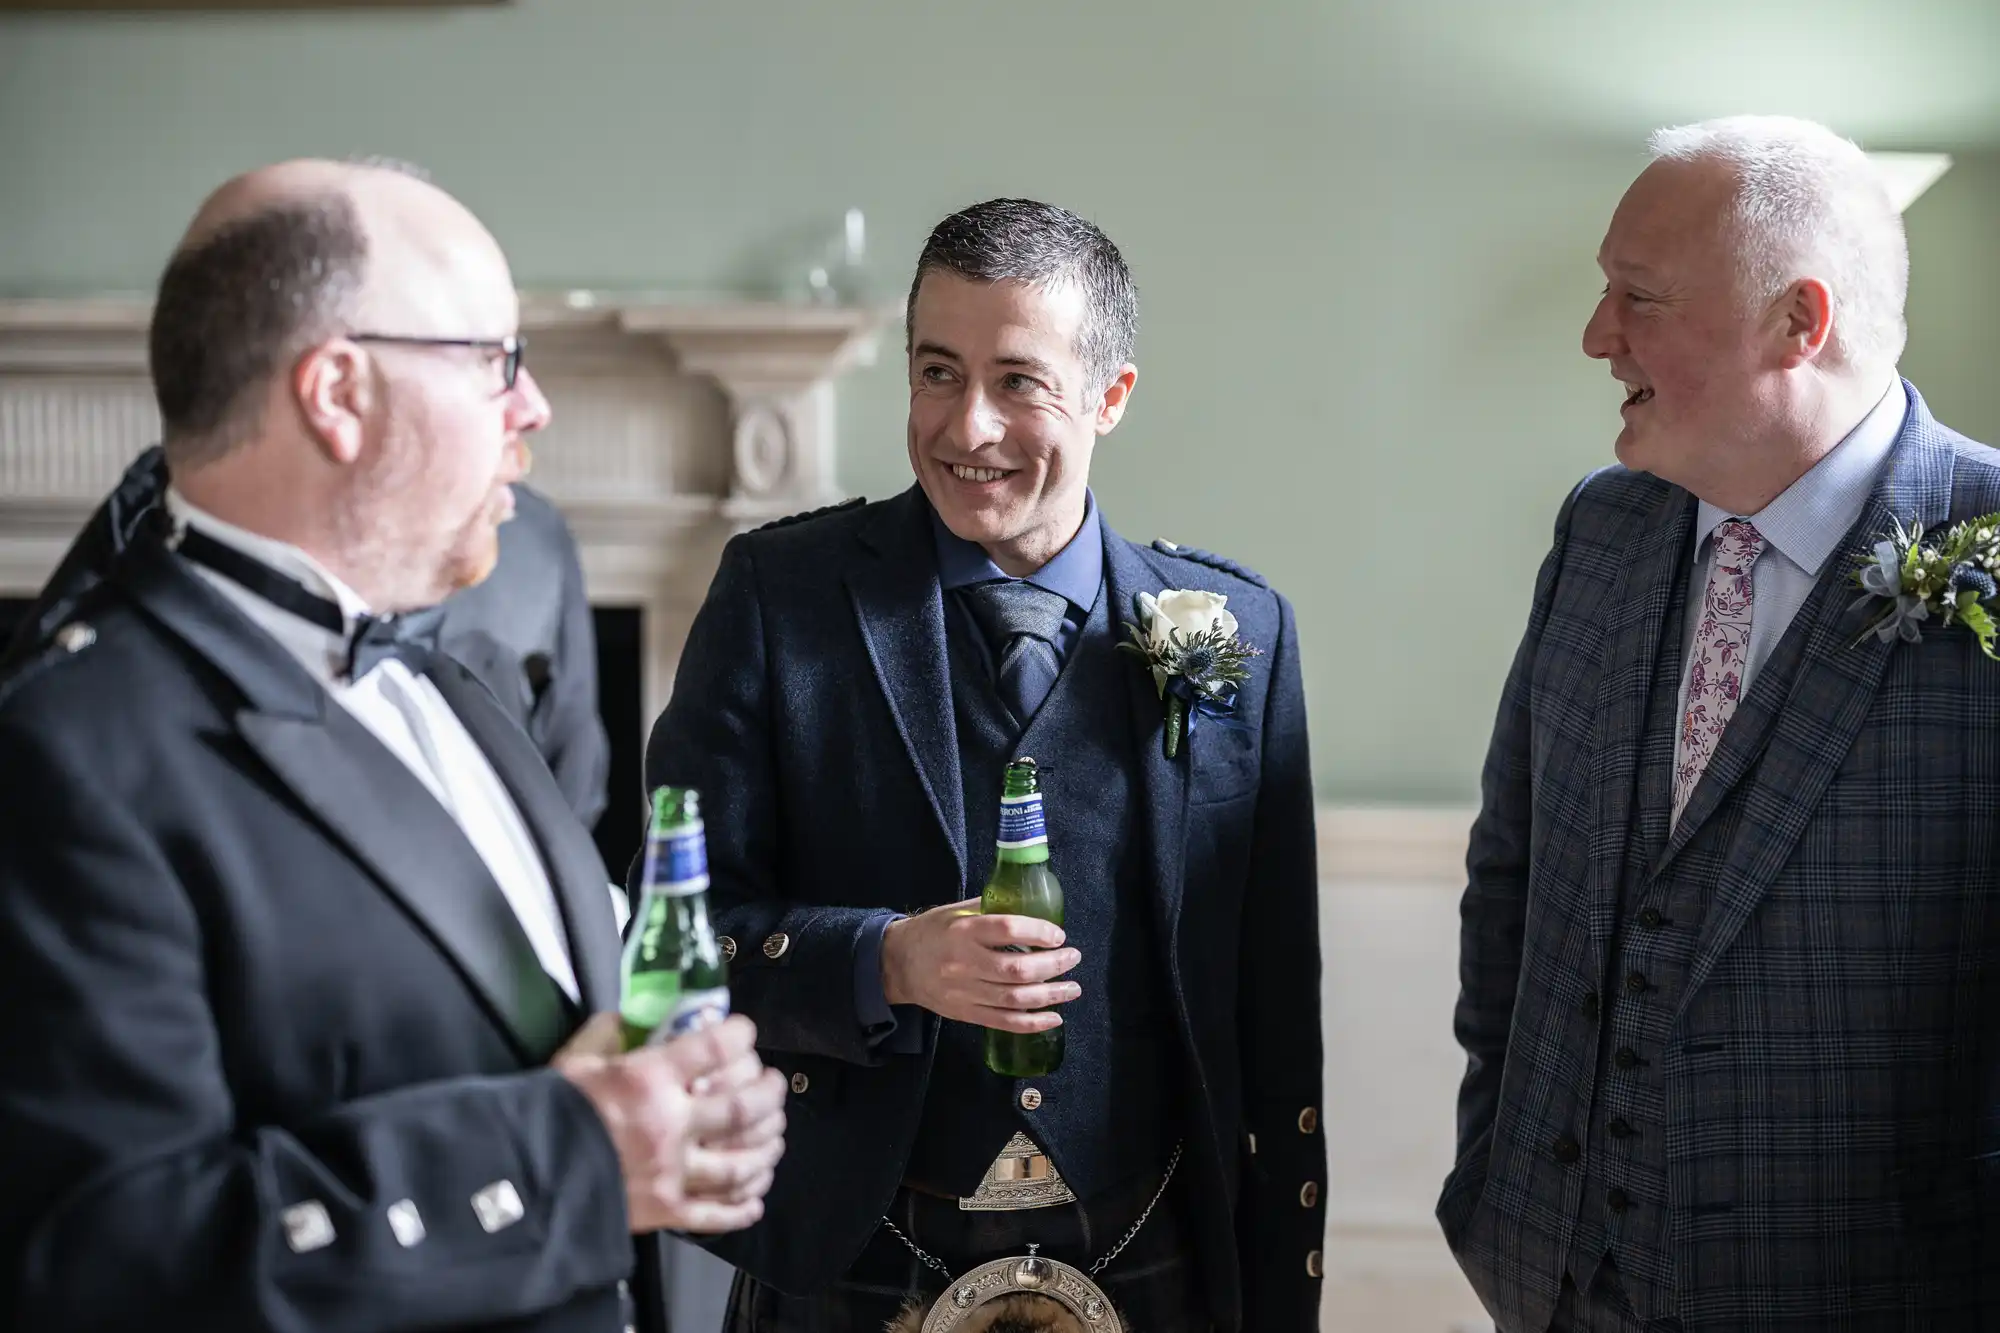 Three men in suits stand indoors, holding beer bottles and chatting. One man, in the middle, wears a traditional Scottish outfit with a sporran.